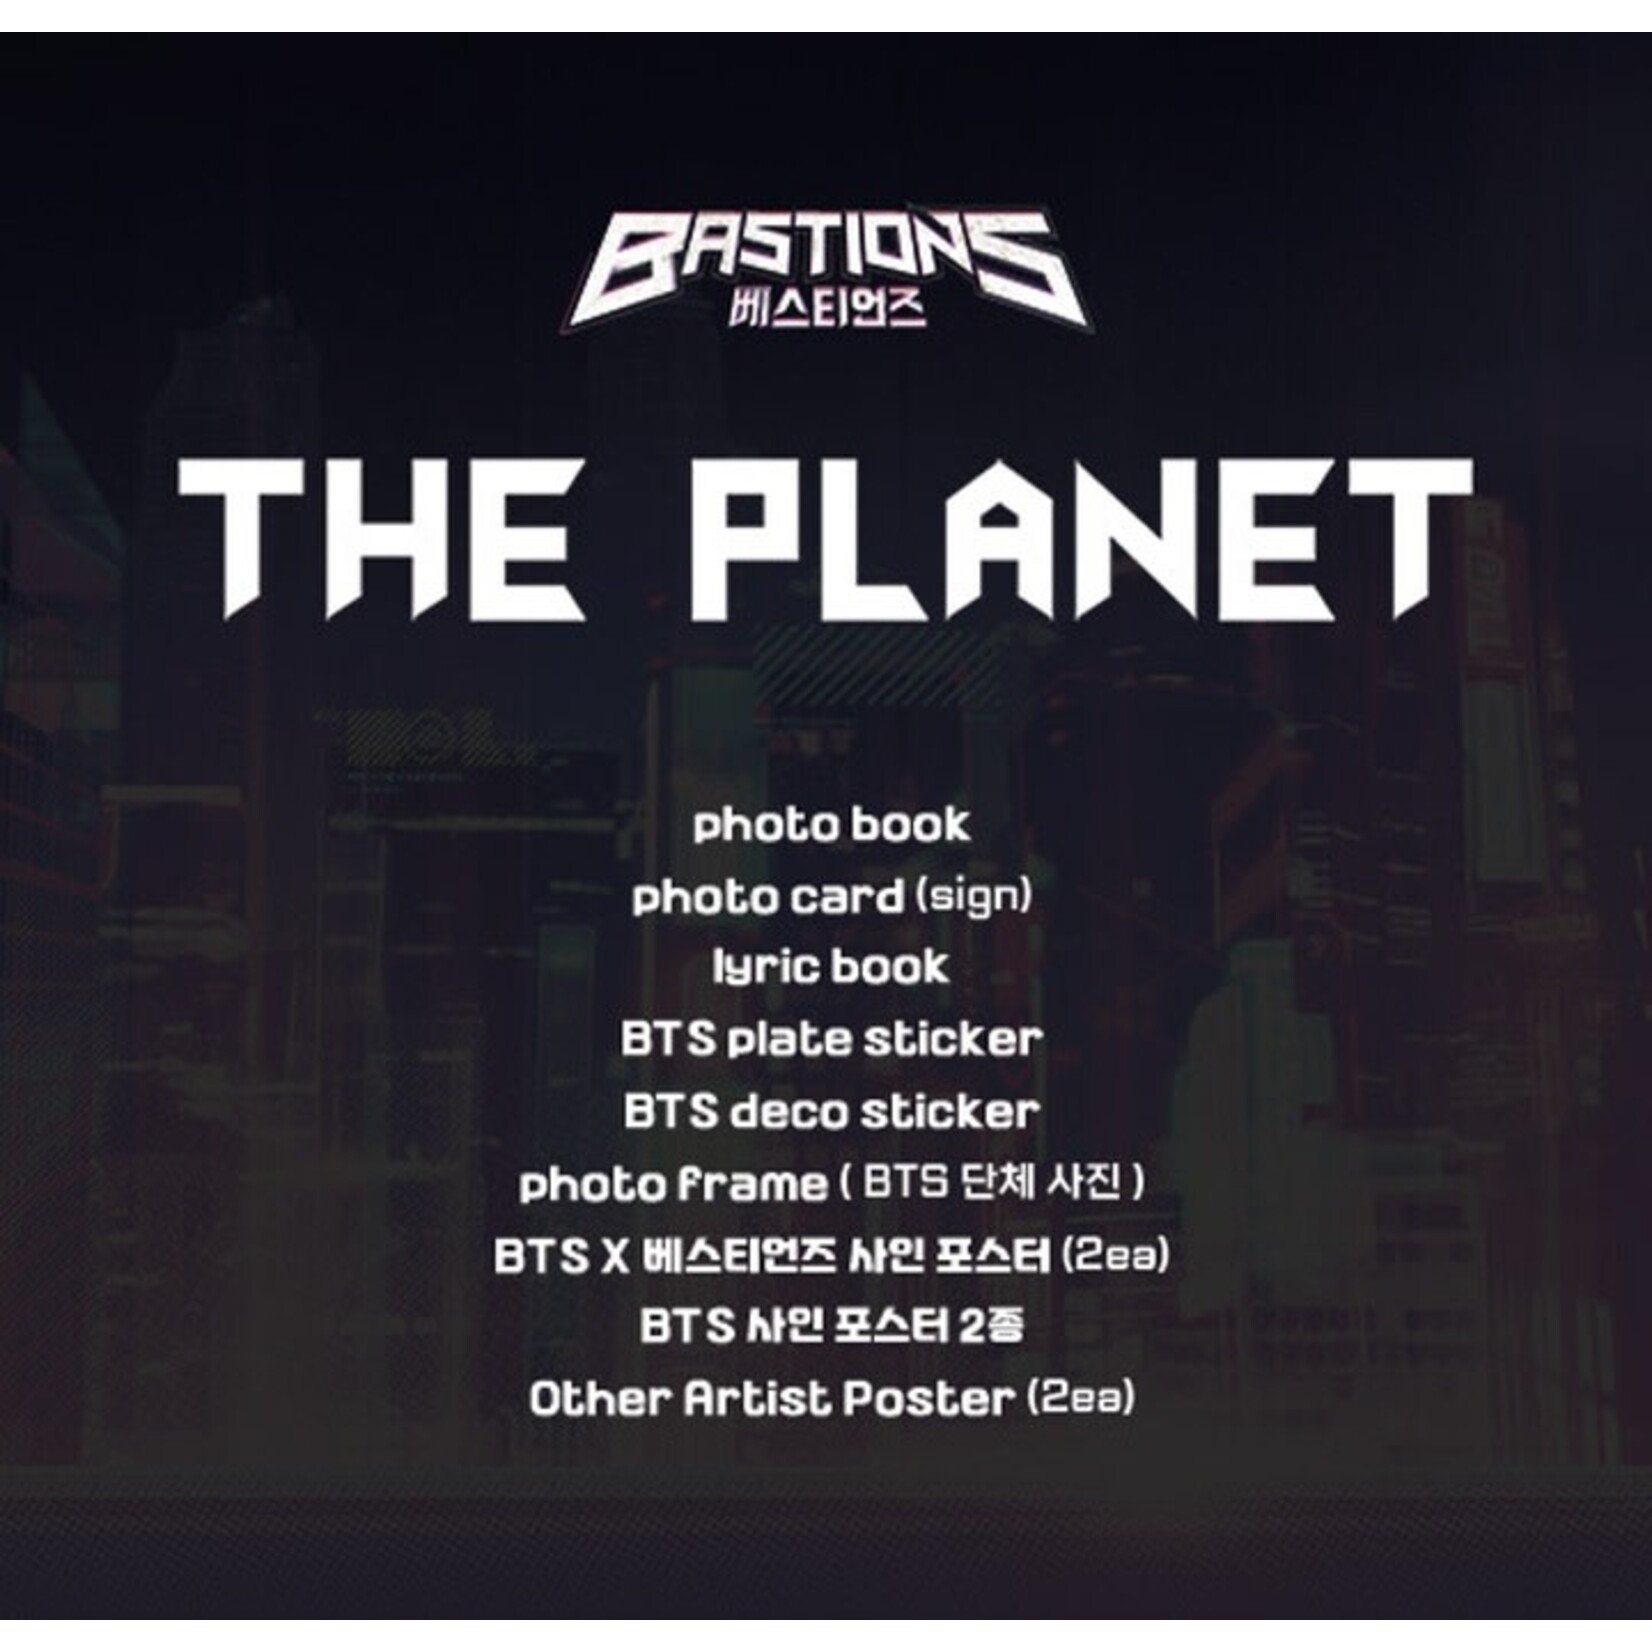 BTS BTS - [THE PLANET] (BASTIONS OST)